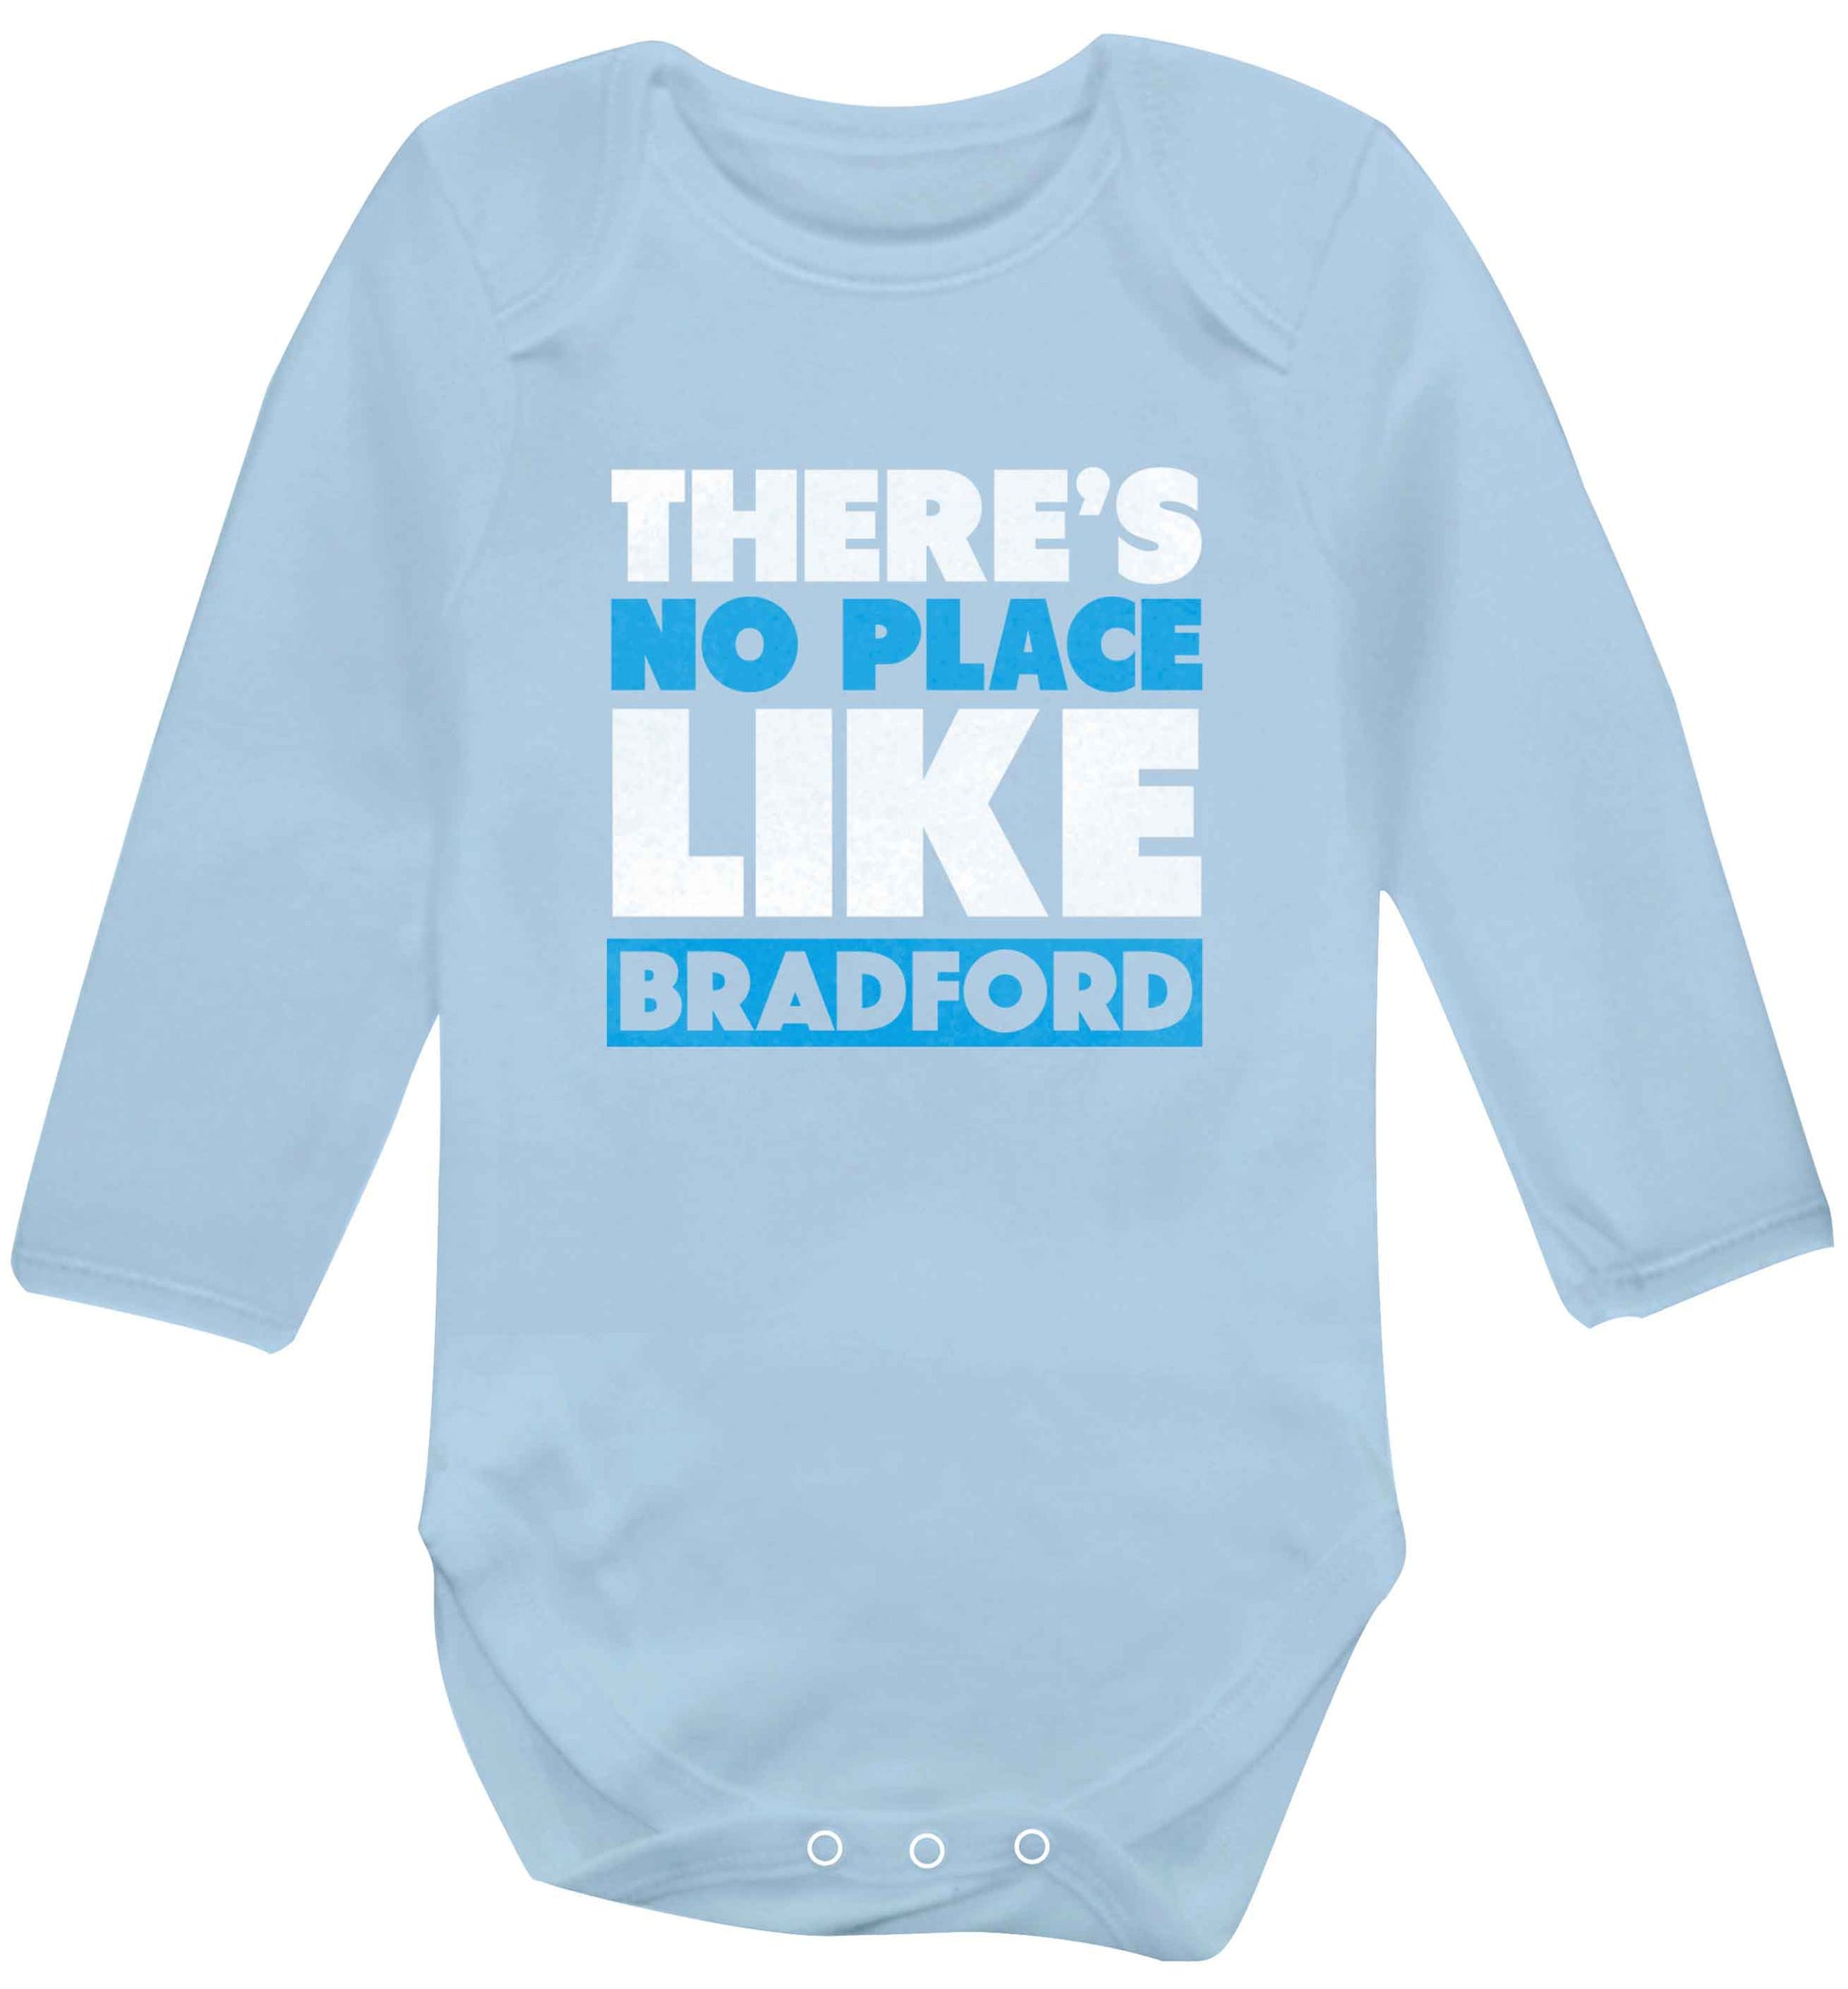 There's no place like Bradford baby vest long sleeved pale blue 6-12 months